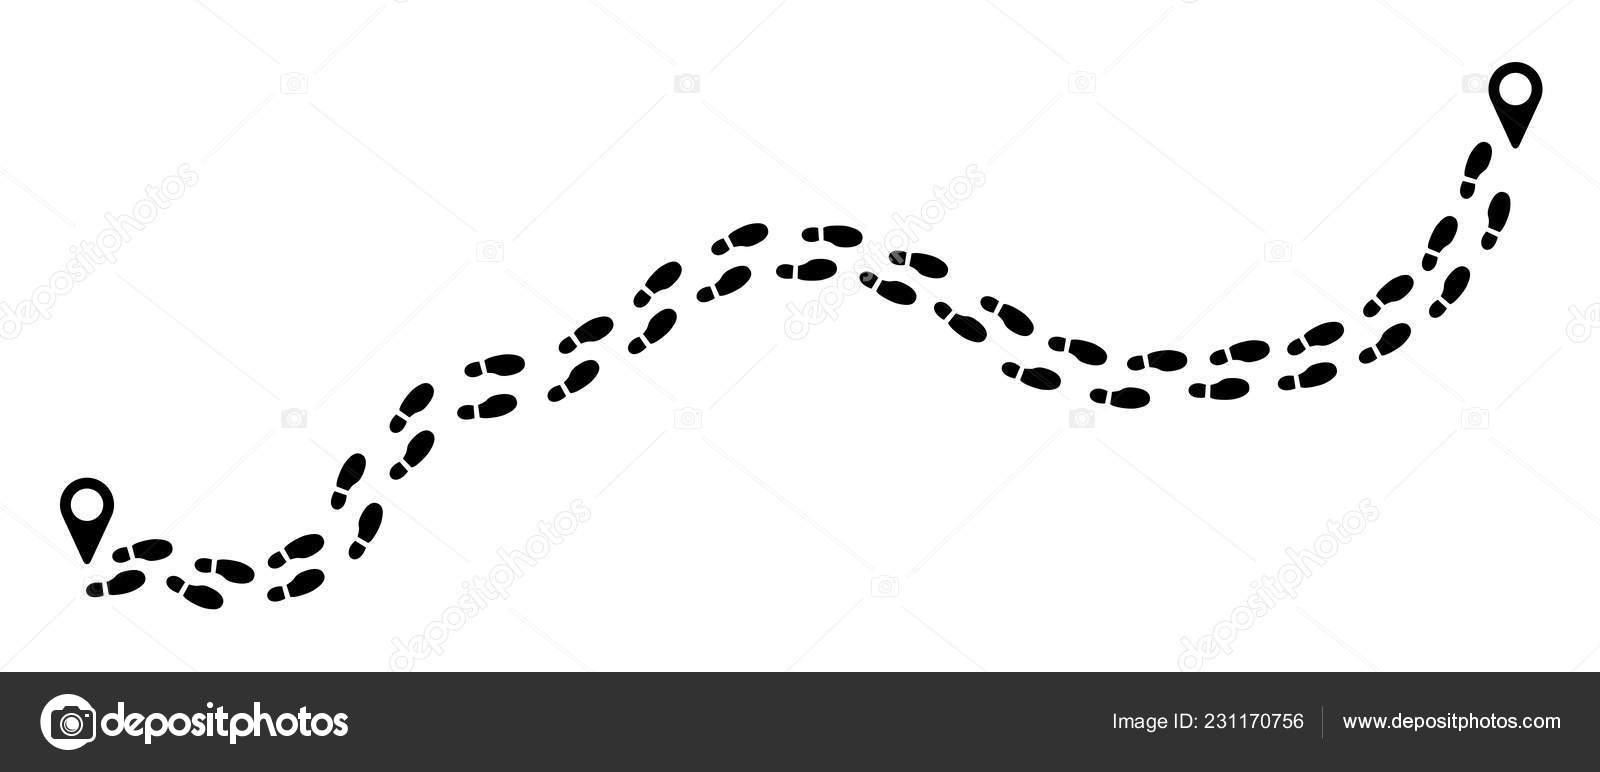 Tracking Track Footprints Human Shoes Sole Funny Feet Footsteps Stock Vector ©MarkRademaker